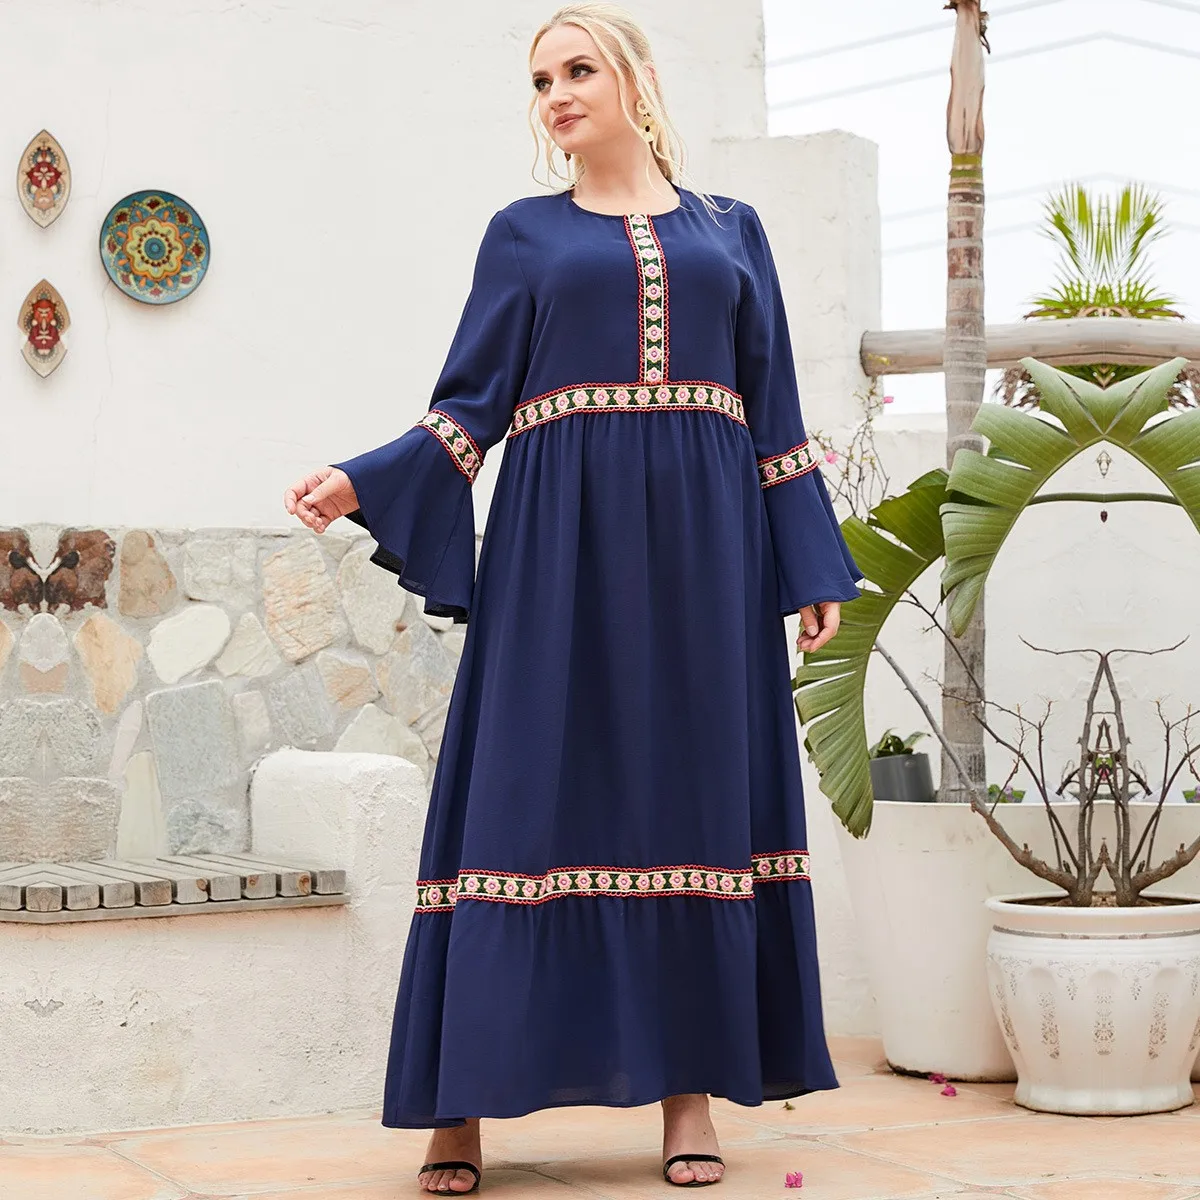 

Muslim Robe Embroidered Bell Sleeve Women Clothing African Clothing Arabian Loose Round Neck Bohemian Blue Plus Size Dress M-4XL